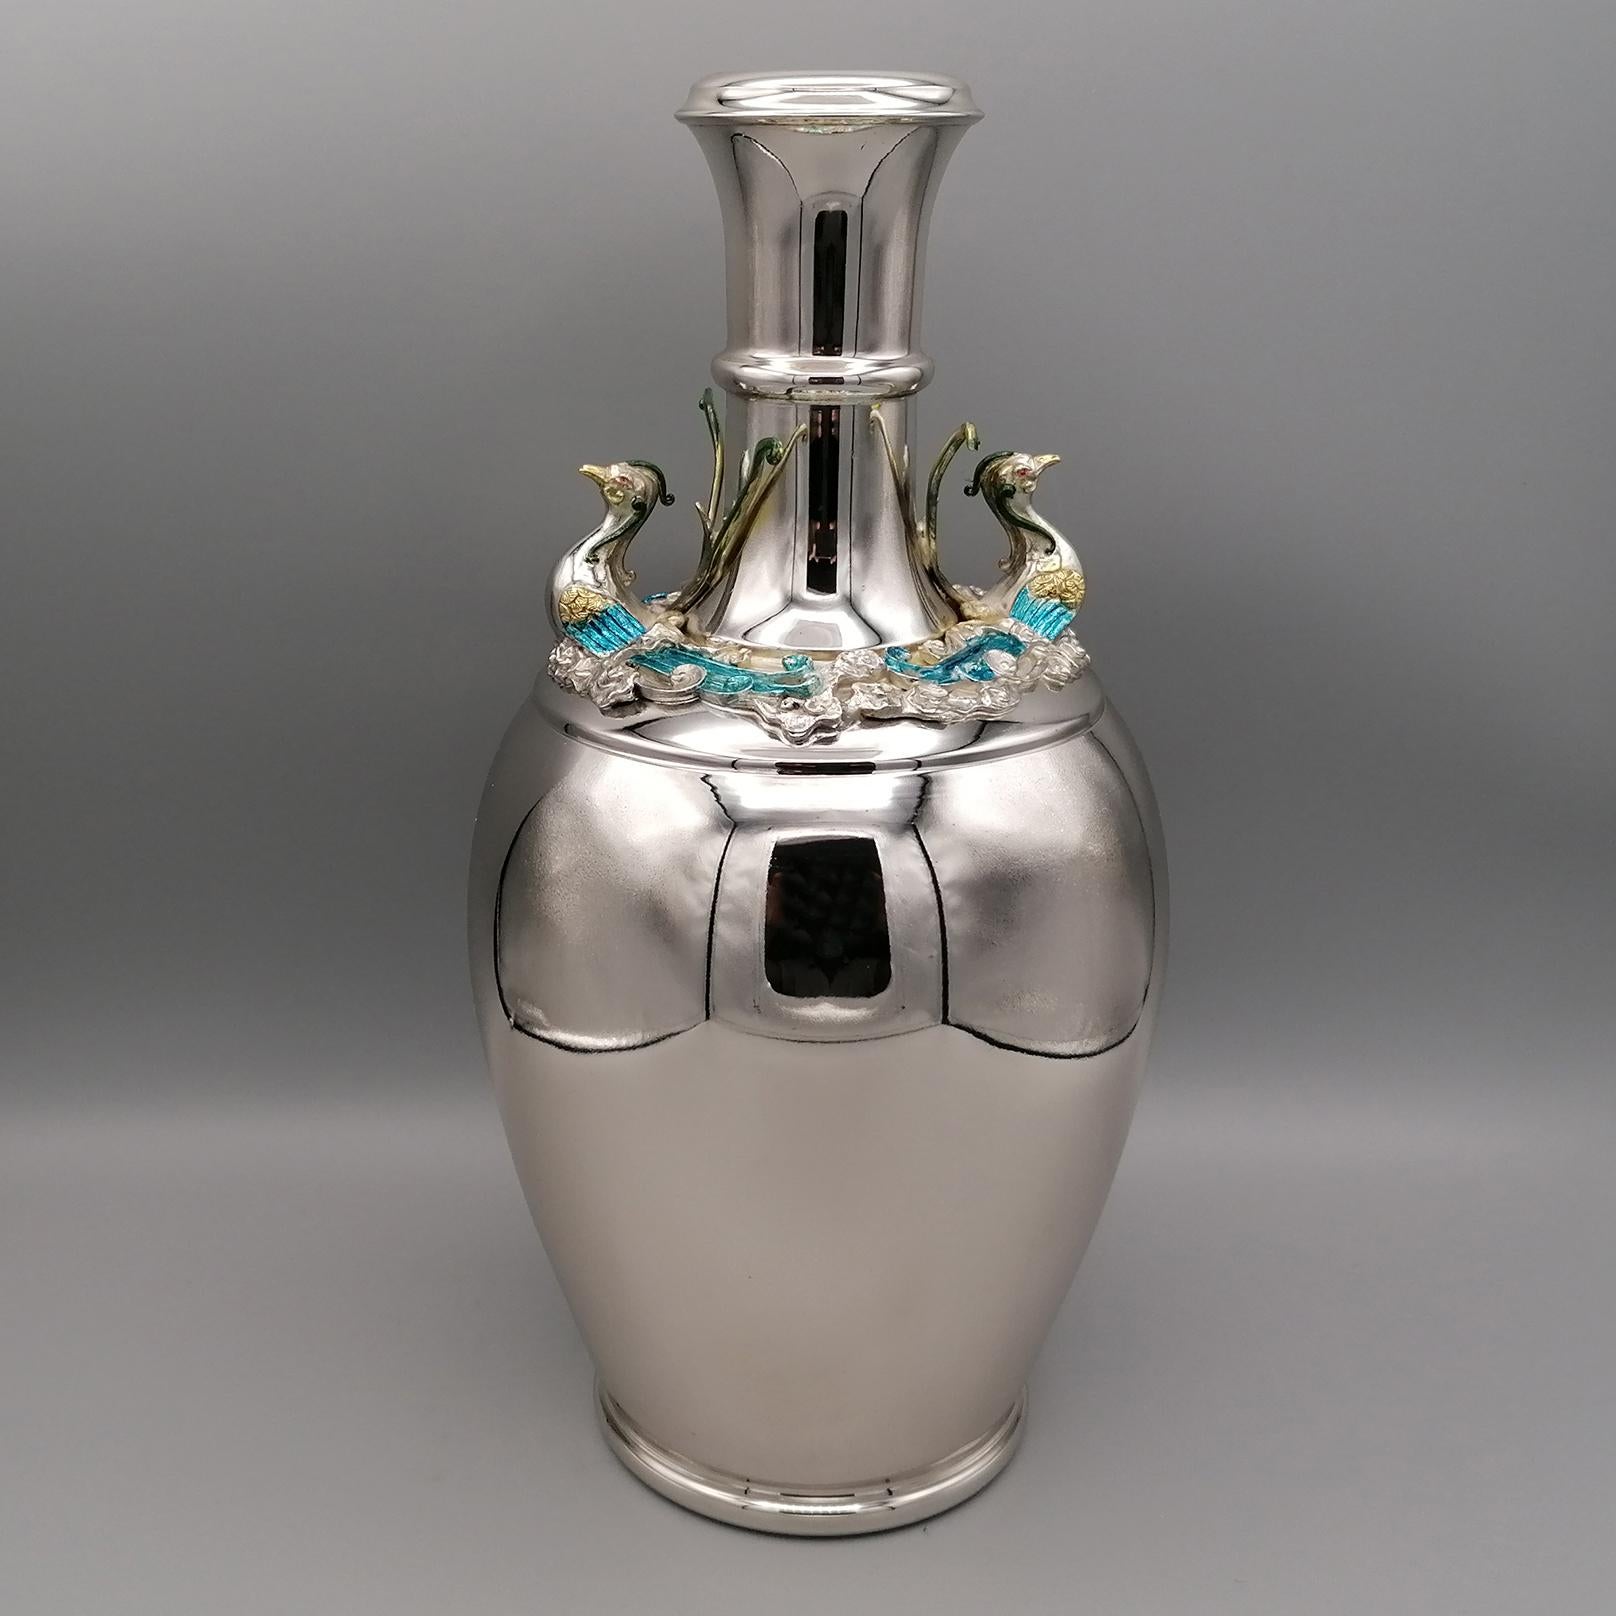 Vase in solid silver 800 with enamelled Phoenix,
replica of a vase of the
Ching Dynasty 1644 - 1911
Chia Ching period 1796 - 1821

Vase from the 